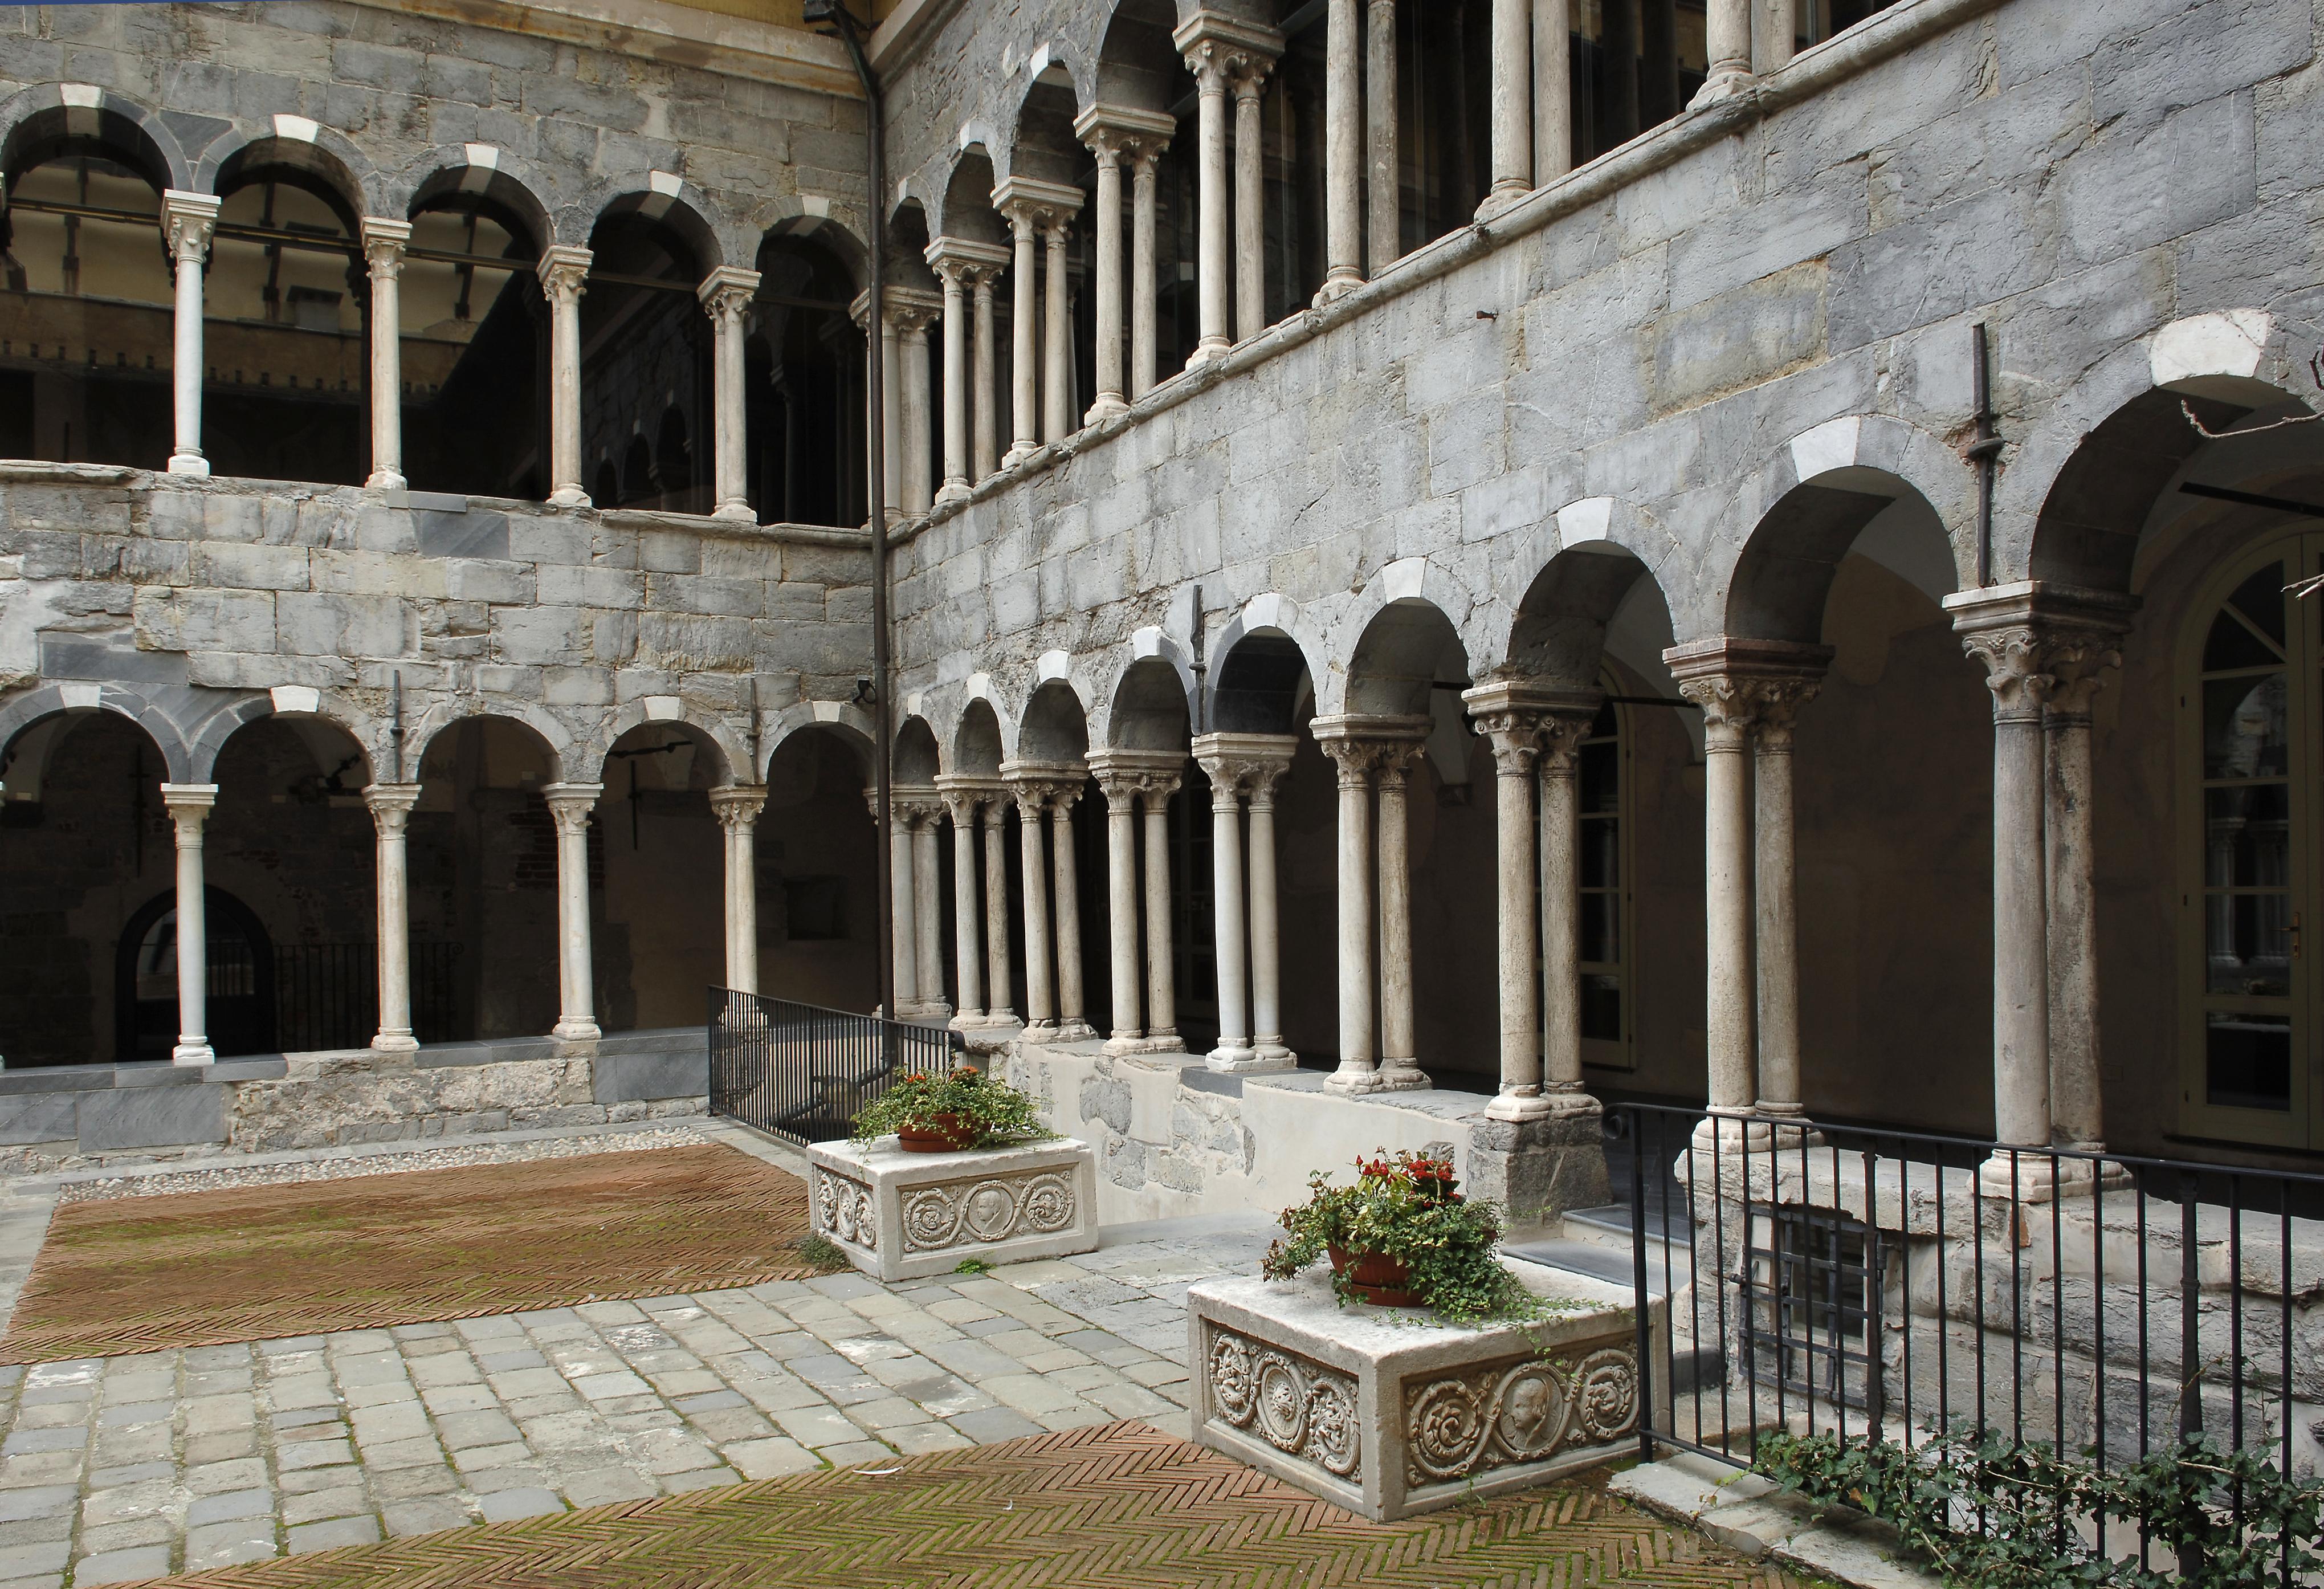 Cloister of the Canons of San Lorenzo